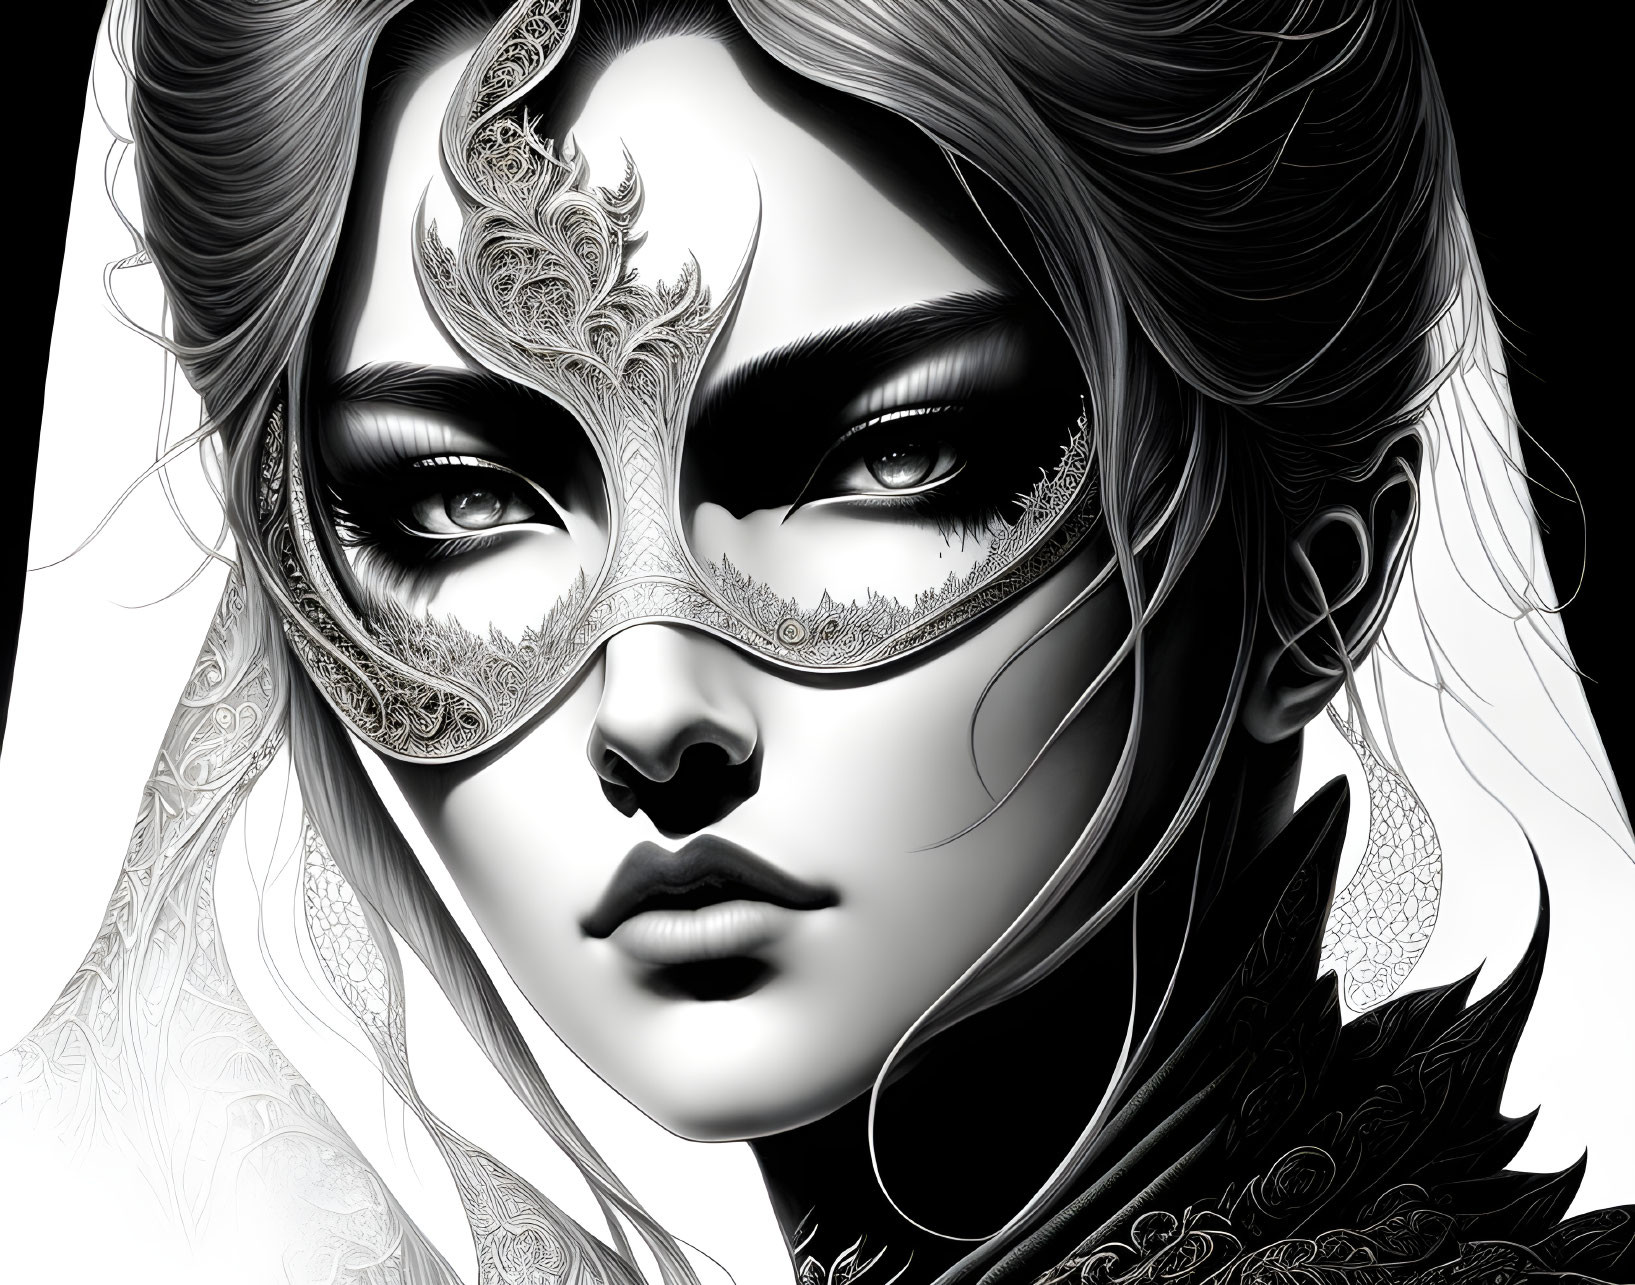 Monochrome illustration of person with lace mask & ornate patterns